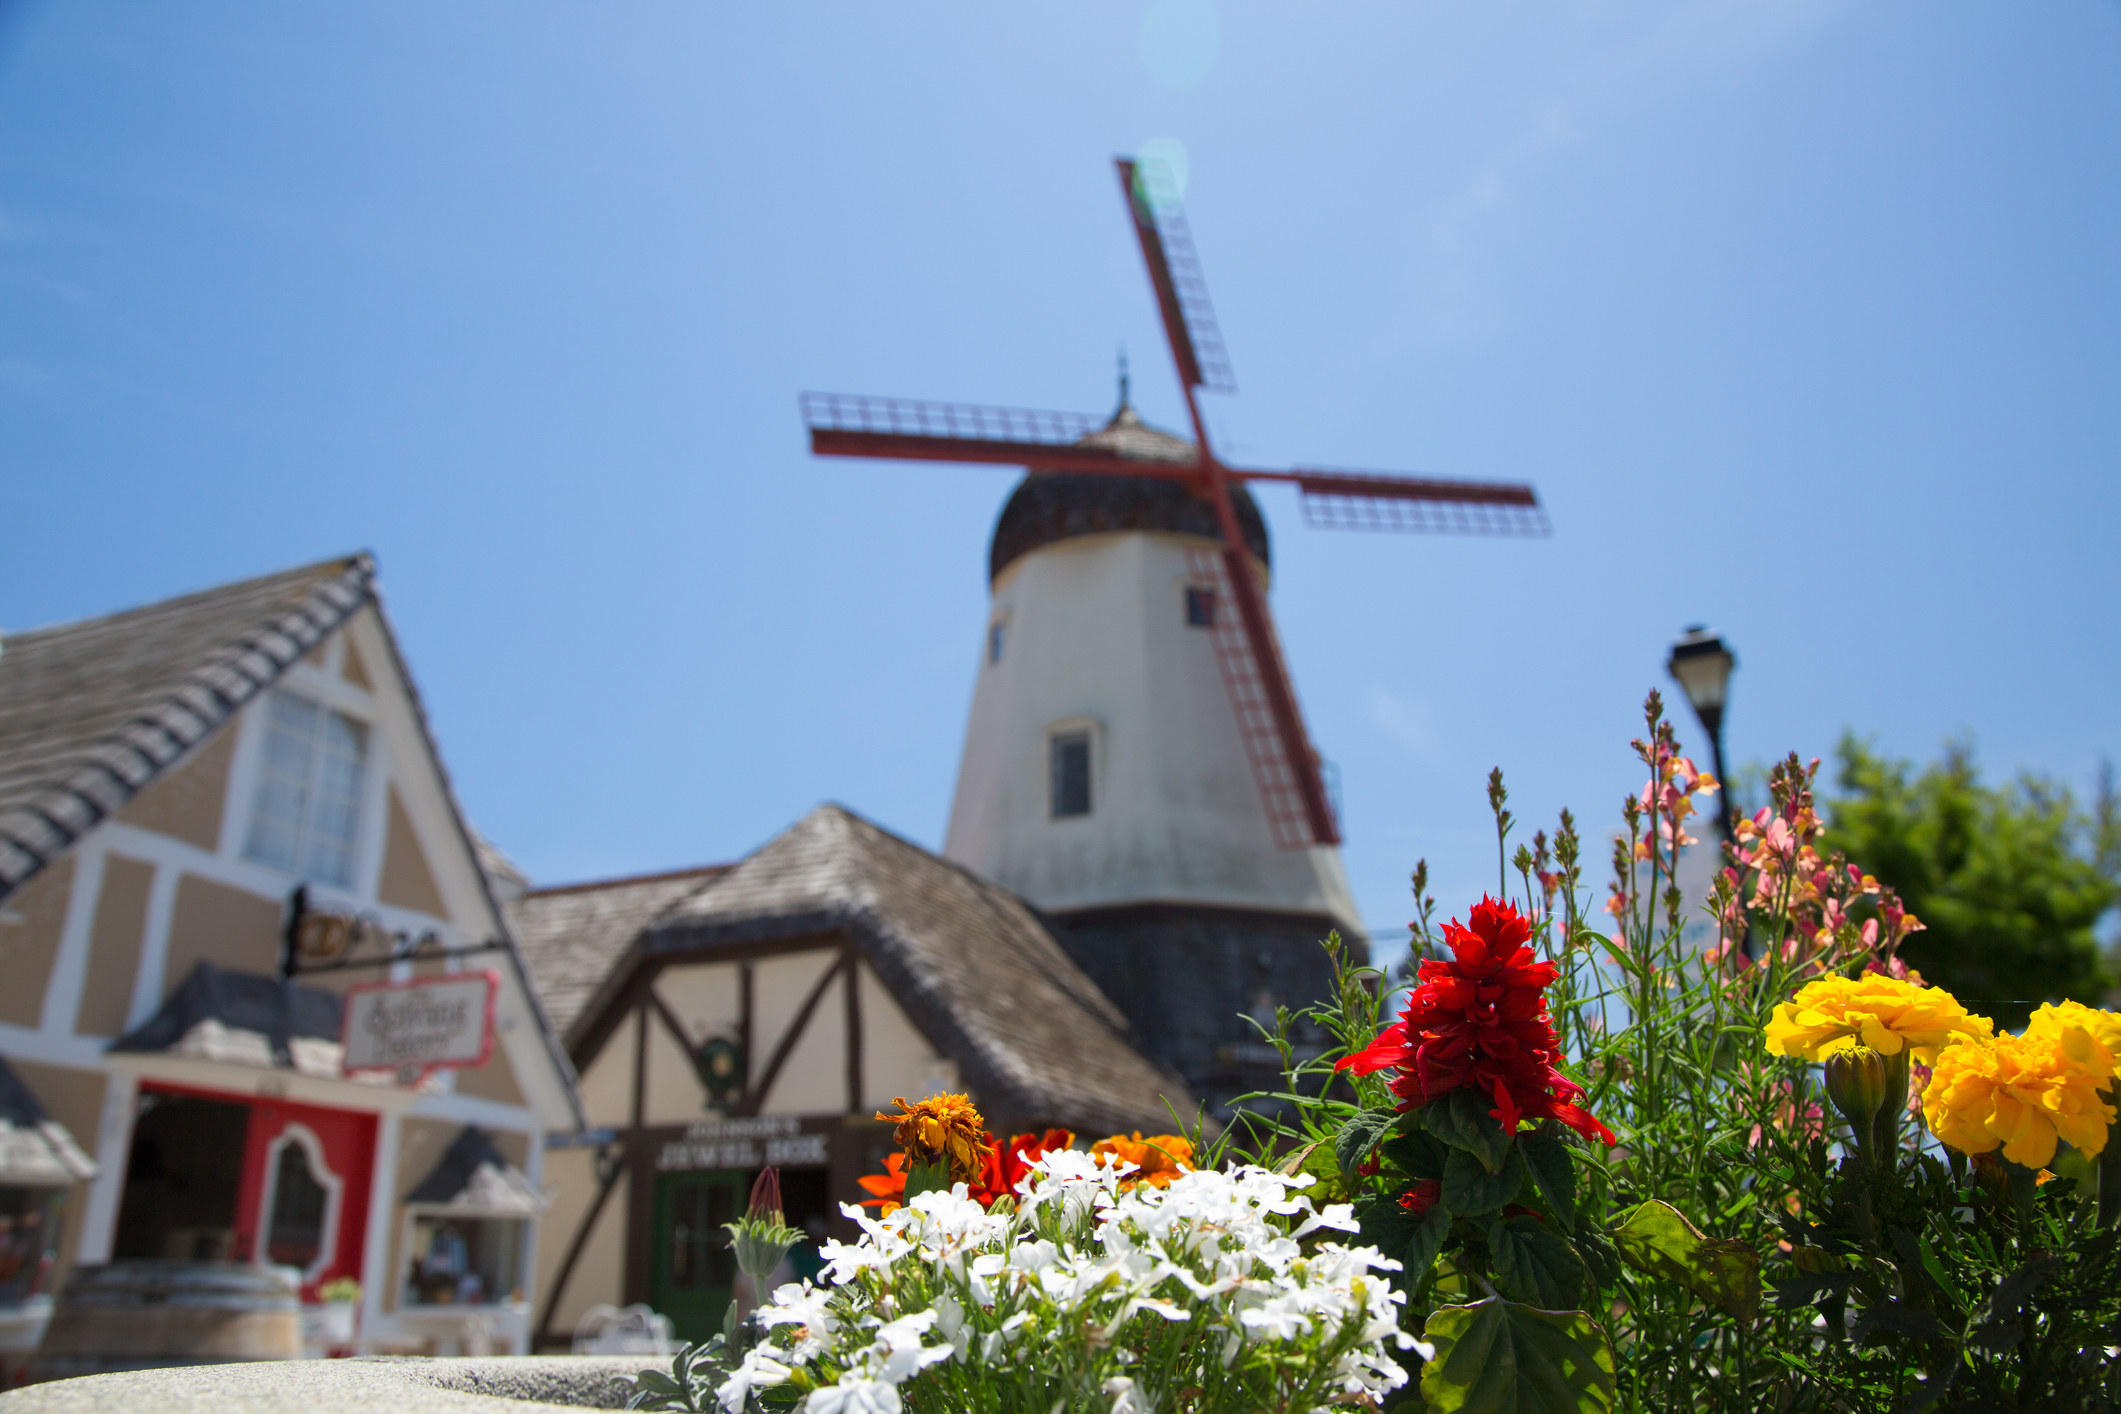 Flowers in front of a Solvang windmill